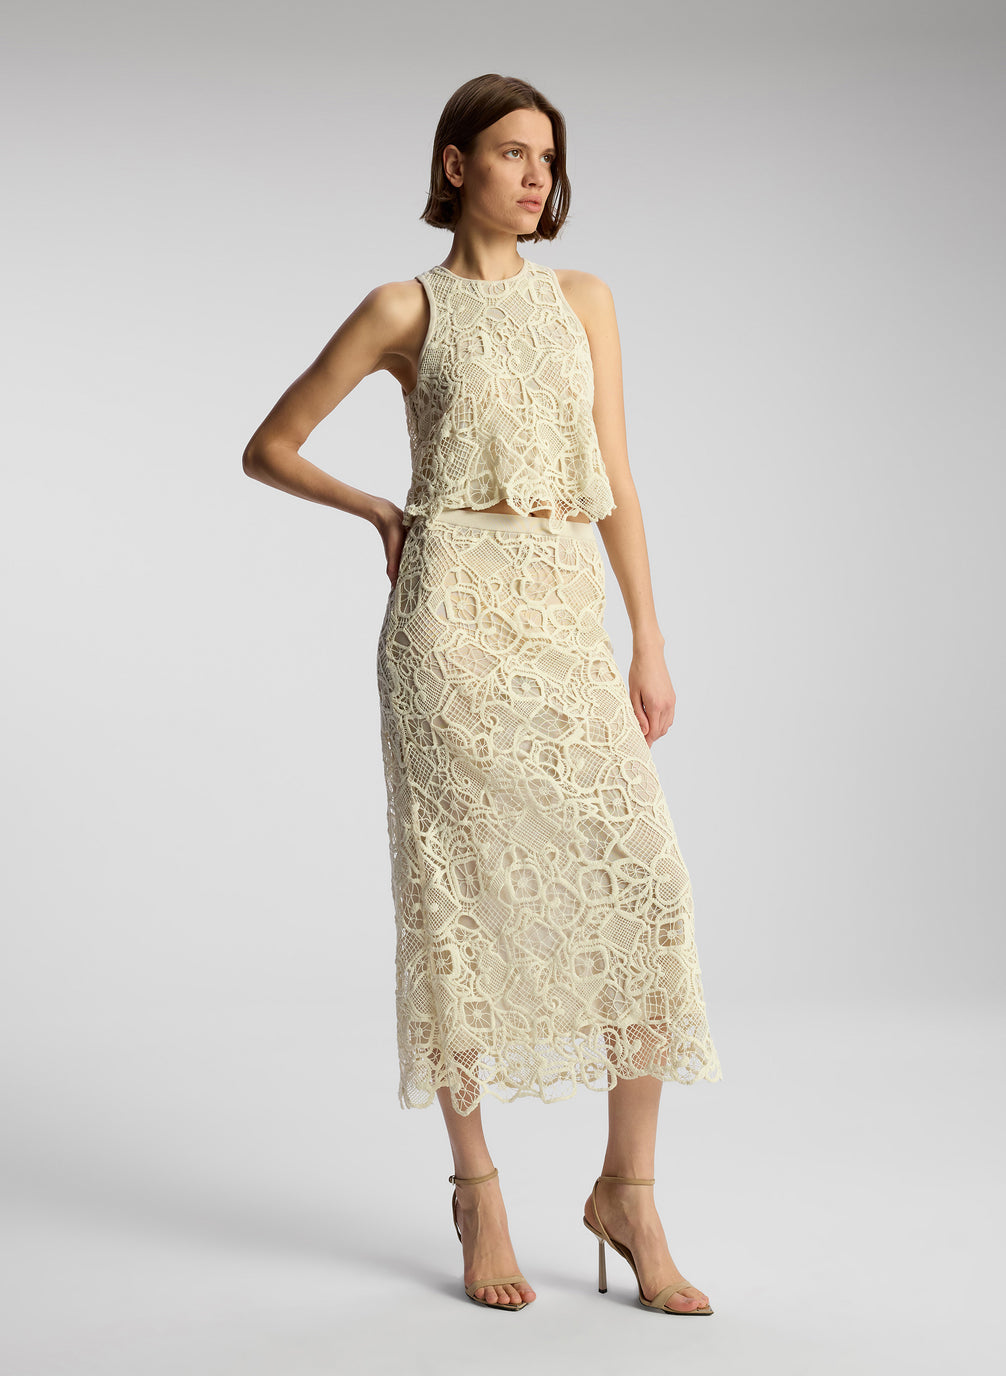 side view of woman wearing off white lace shirt and skirt set